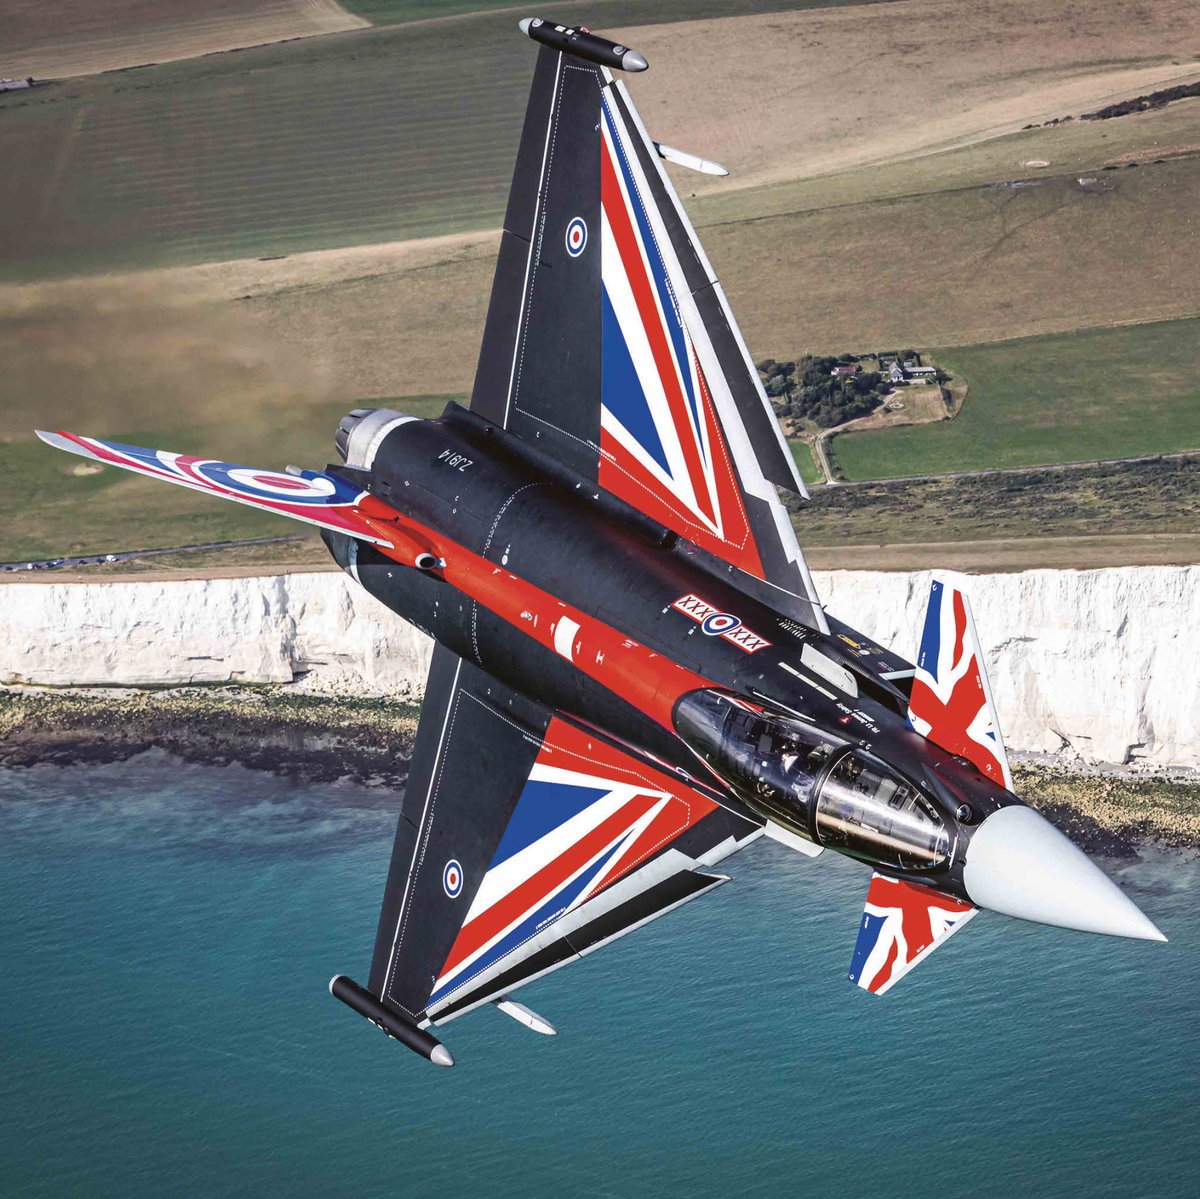 12 Days of @RAF images for Christmas - Day 10! The RAF Typhoon Display Team aircraft, Blackjack, piloted by Flt Lt Saintly flying over the iconic White Clifts of the southern British coastline
#RAFCalendars  #12DaysOfRAF #ChristmasCountdown